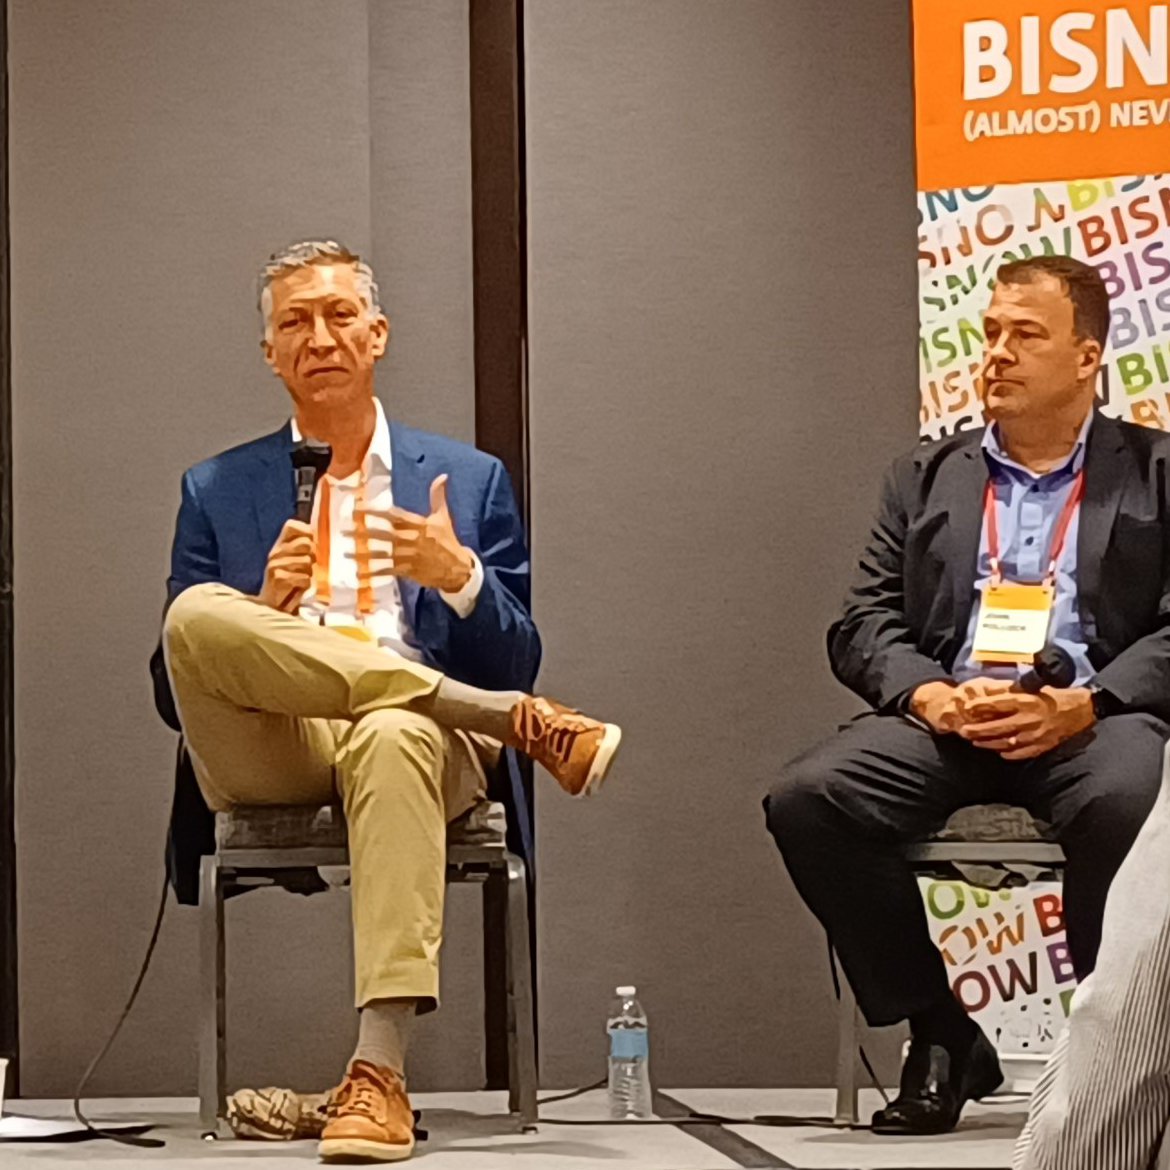 Trask Leonard, CEO of Bayside Realty Partners, participated in a panel discussion at the Bisnow Northern California Healthcare conference in San Francisco